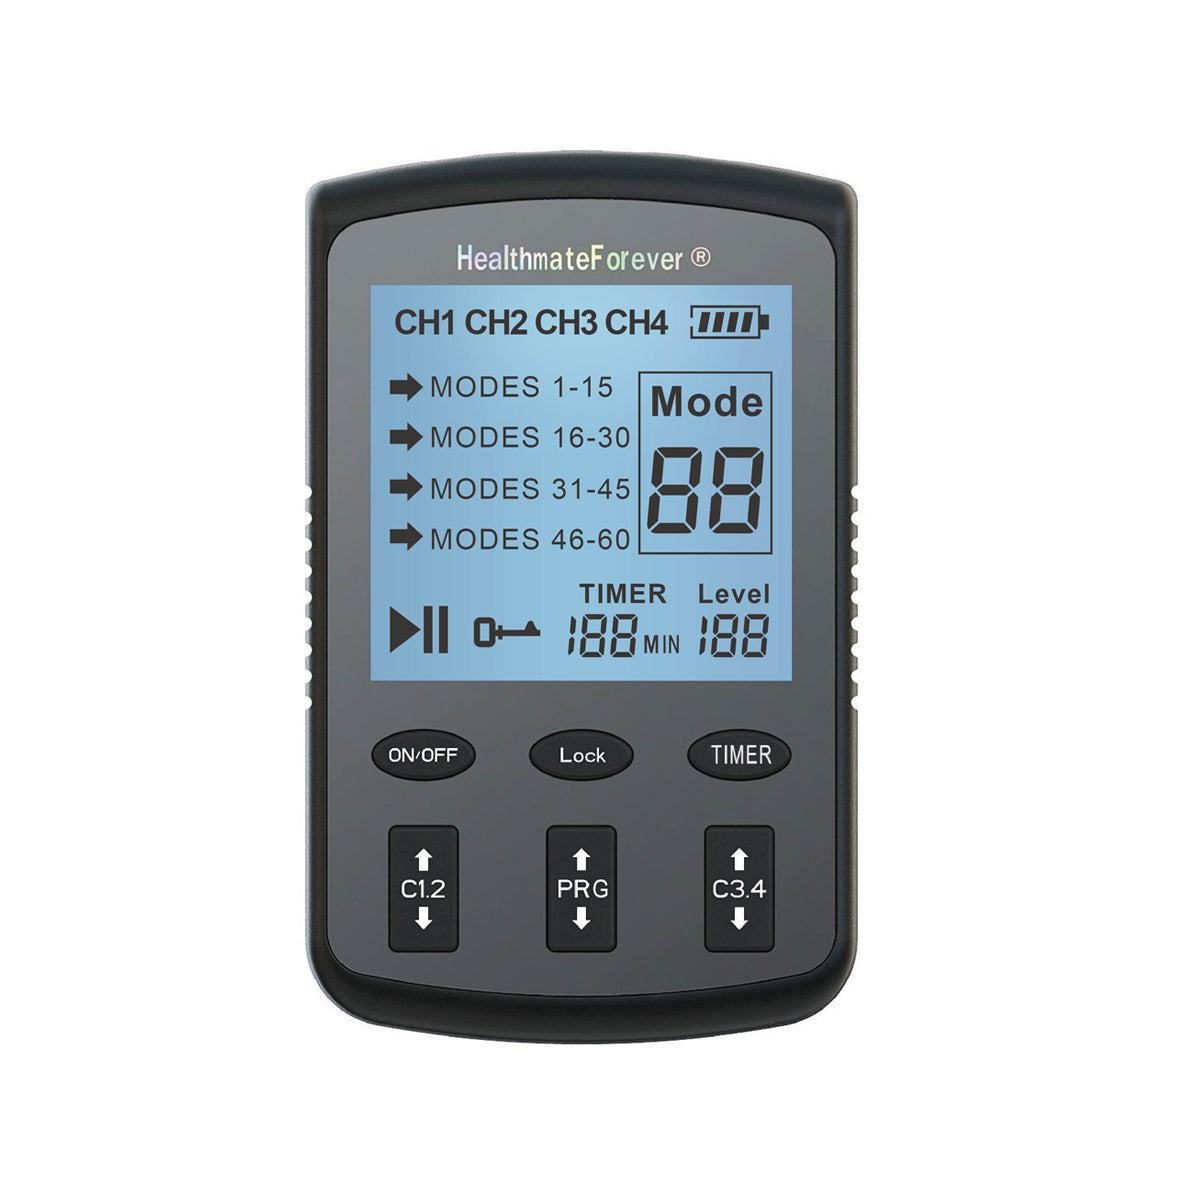 Pain Relief Electrotherapy TENS Units